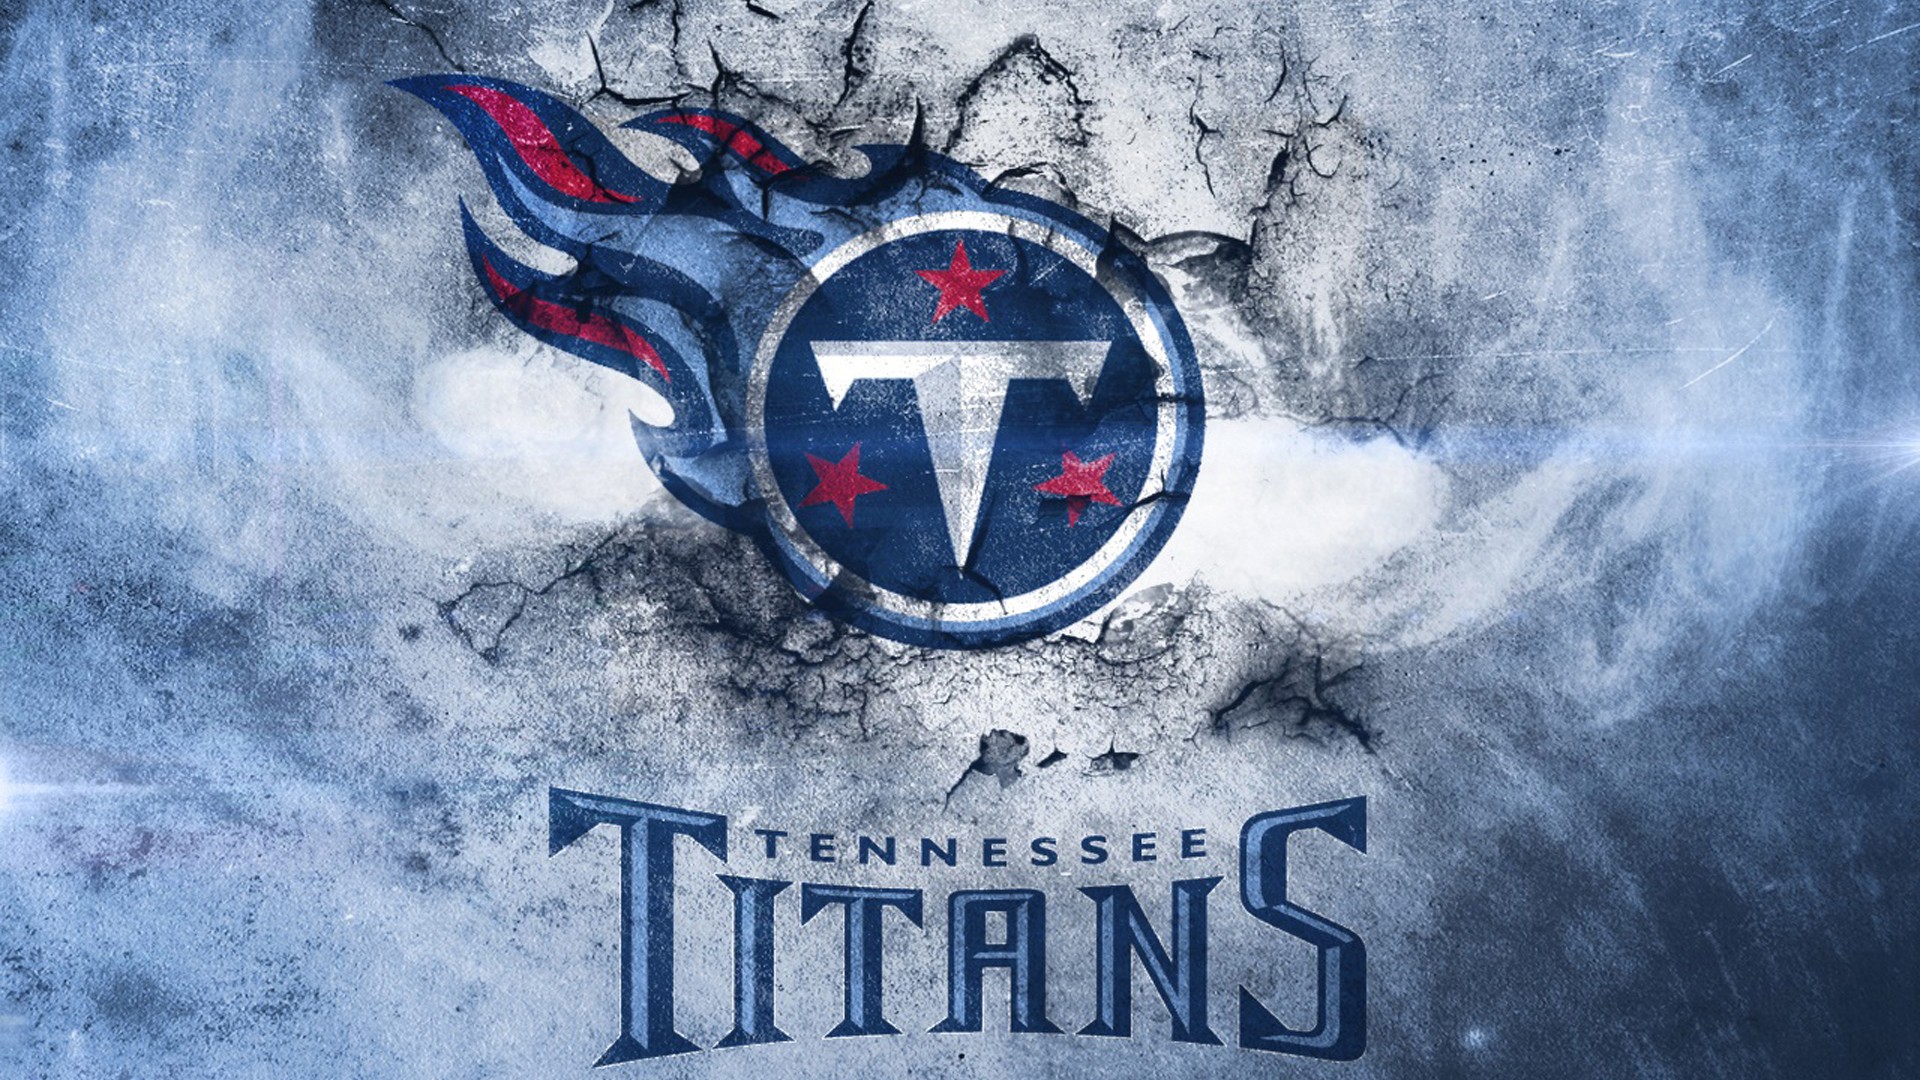 HD Tennessee Titans Backgrounds With high-resolution 1920X1080 pixel. You can use this wallpaper for your Mac or Windows Desktop Background, iPhone, Android or Tablet and another Smartphone device